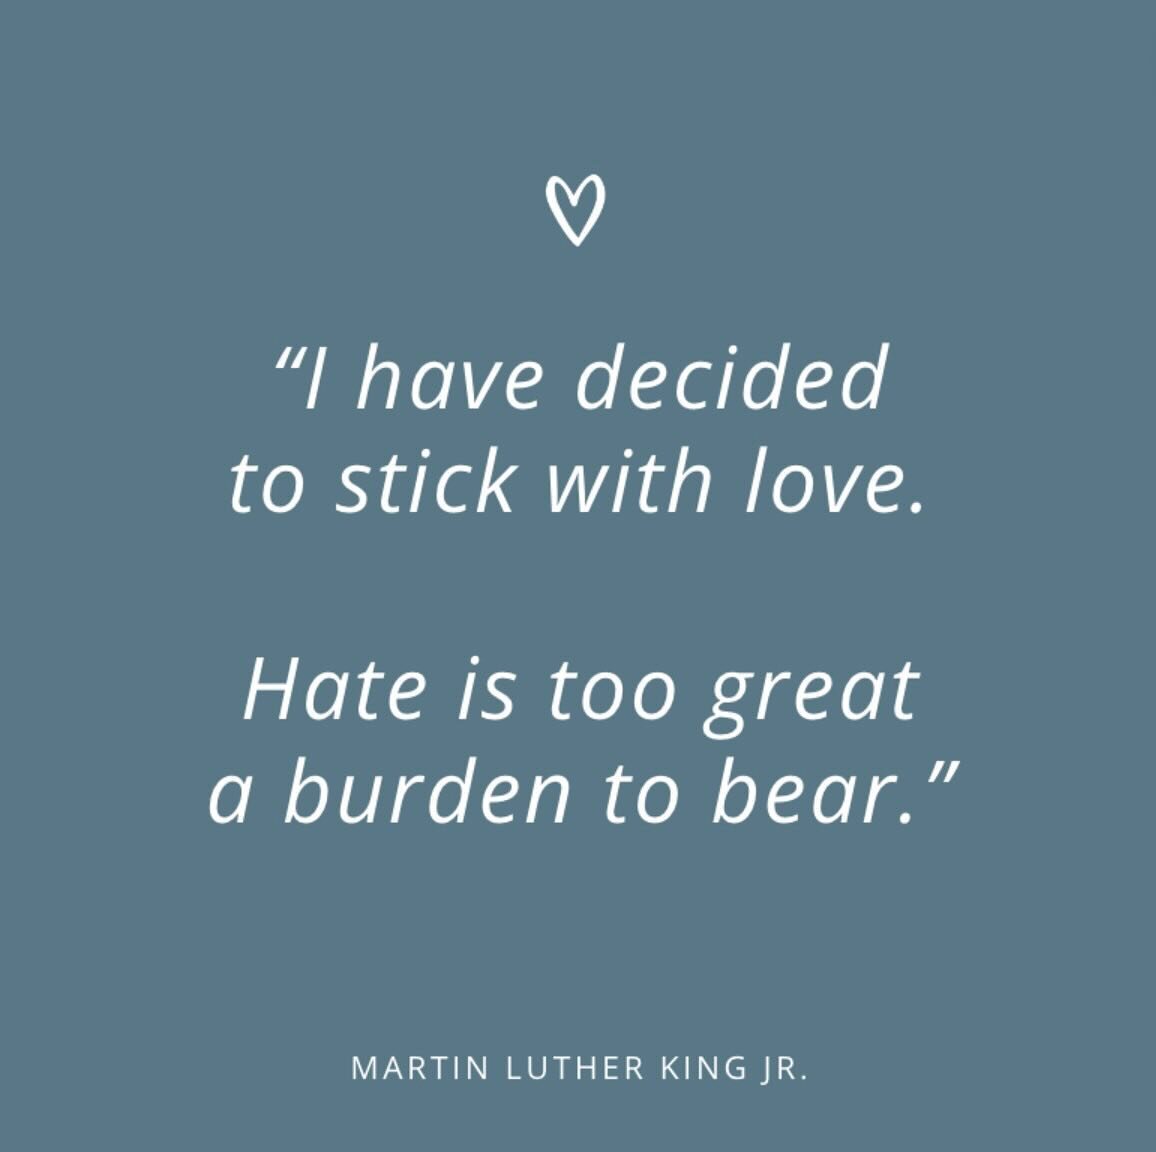 One of our favorites. 💛 

Happy Martin Luther King Jr Day! Wishing everyone a safe and restorative holiday.

#mlkday #mlk #martinlutherkingjr #longweekend #holidayweekend 
#medspa #torrance